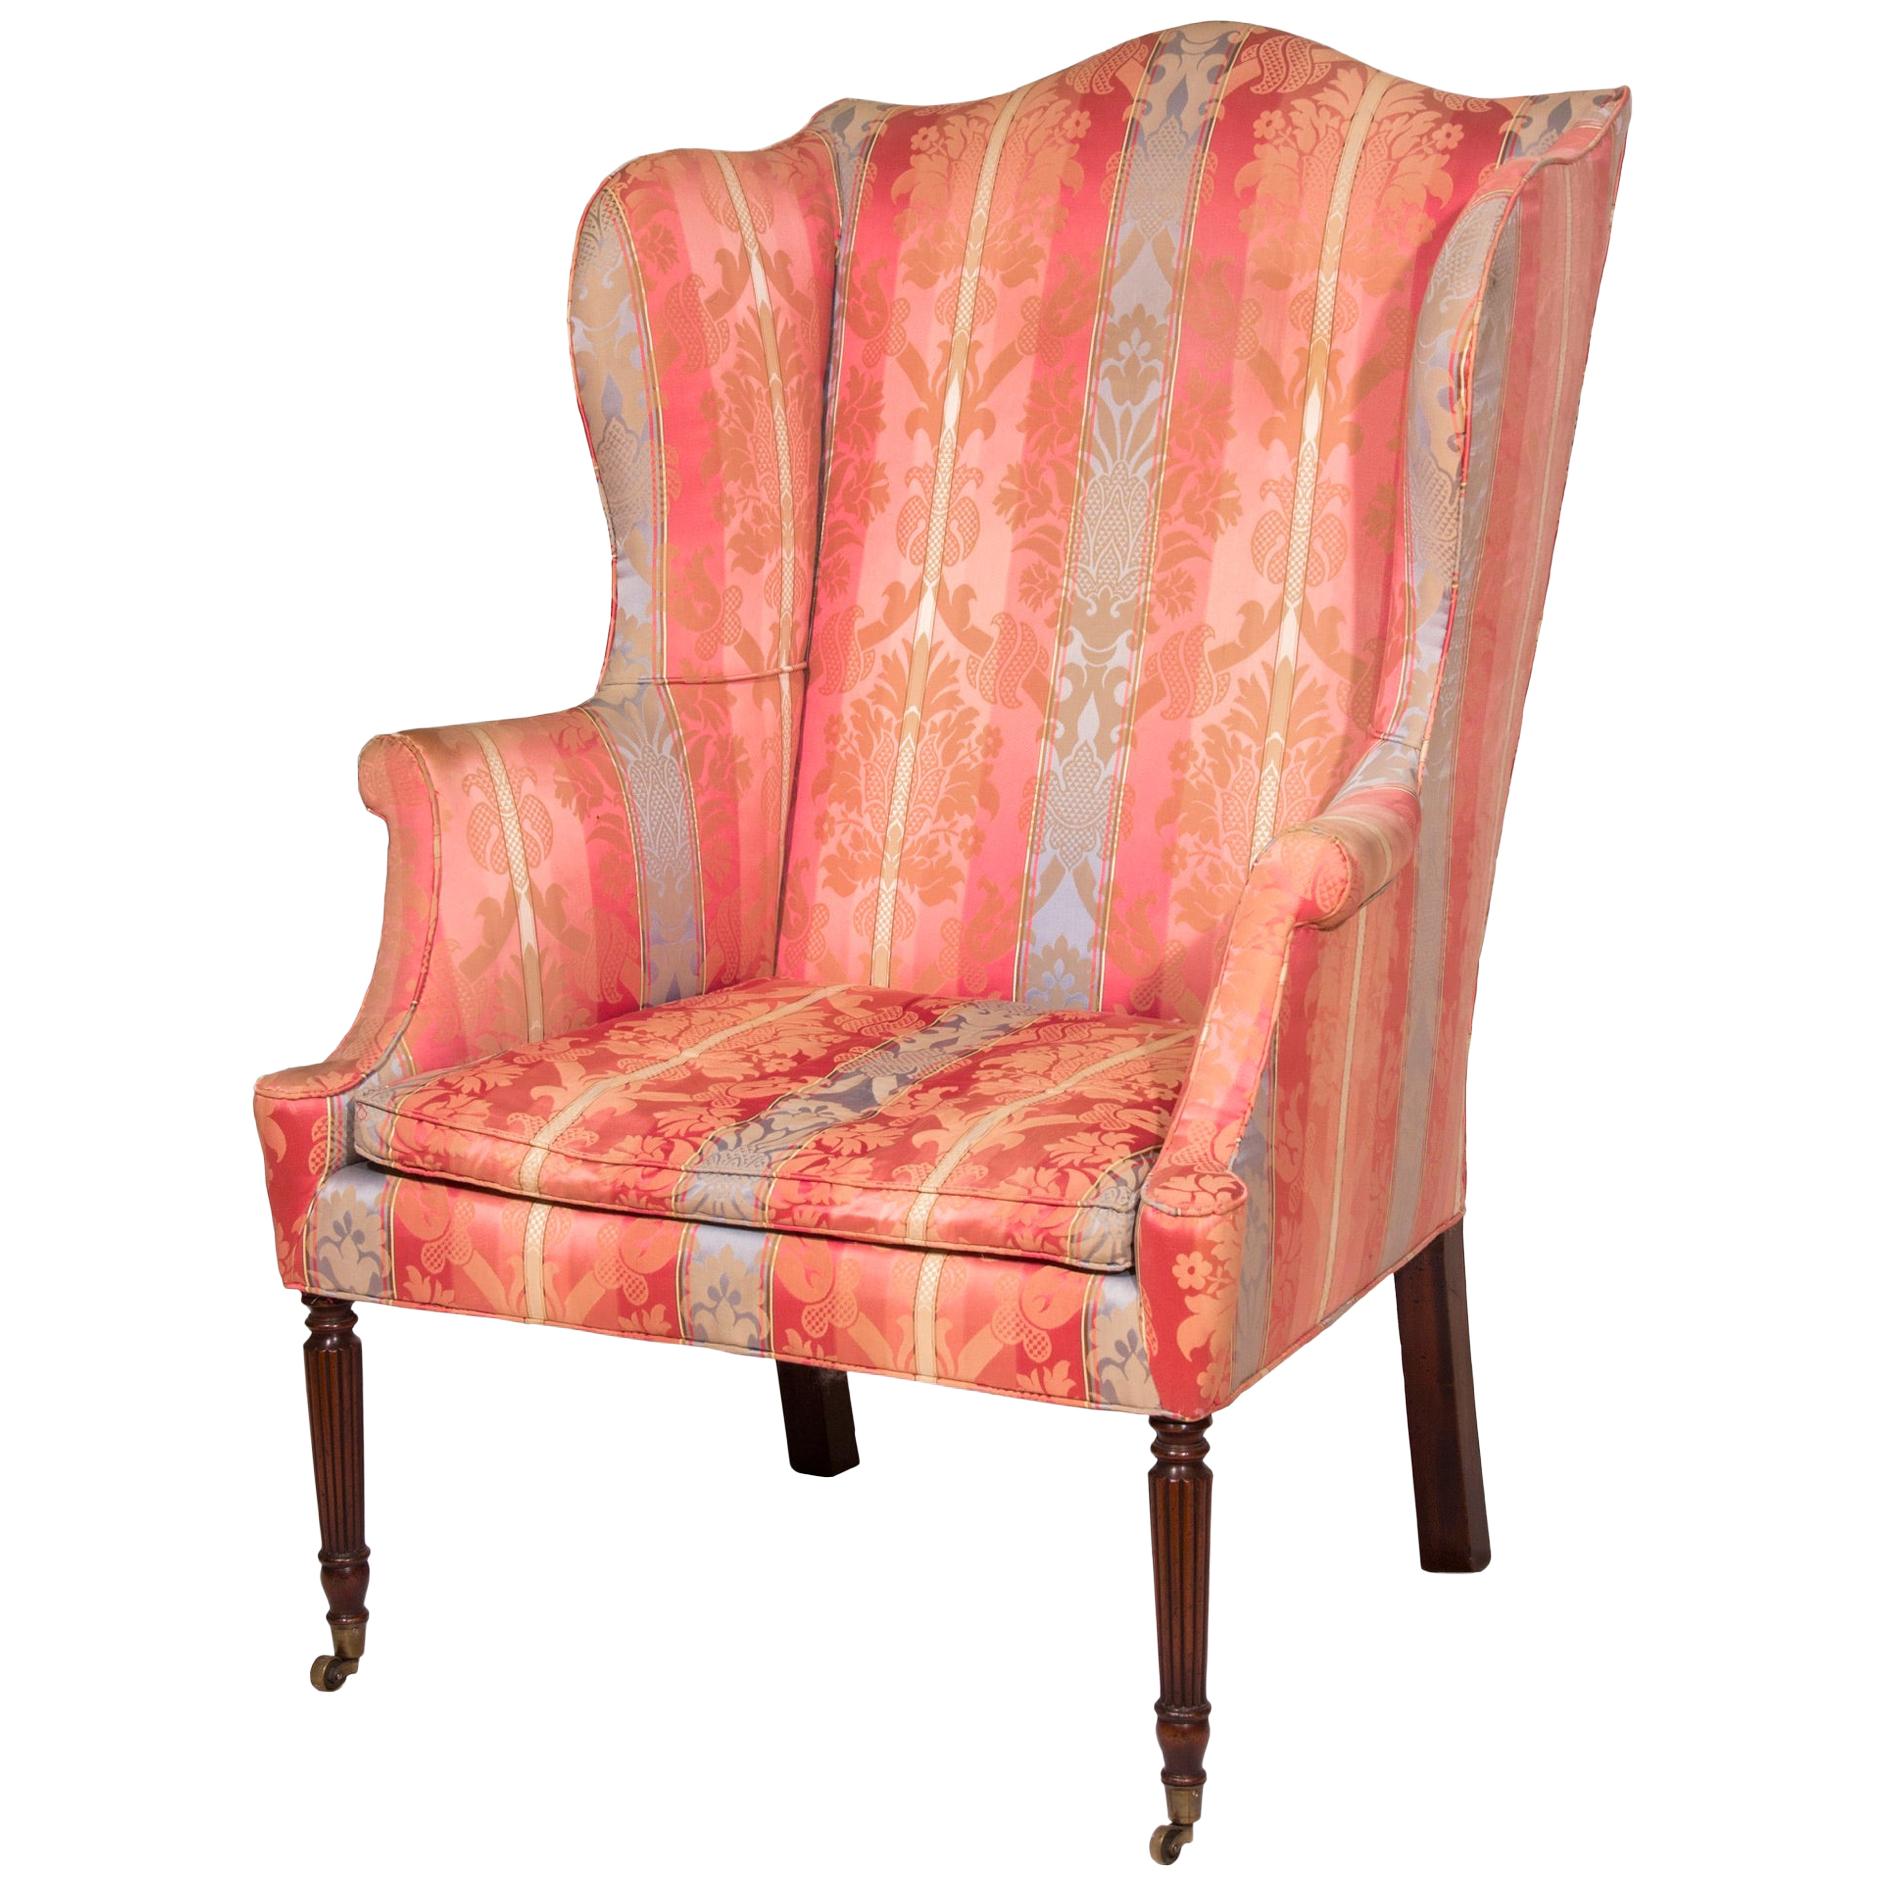 Sheraton-Federal Mahogany Wing Chair, New York, circa 1800 Duncan Phyfe Workshop For Sale